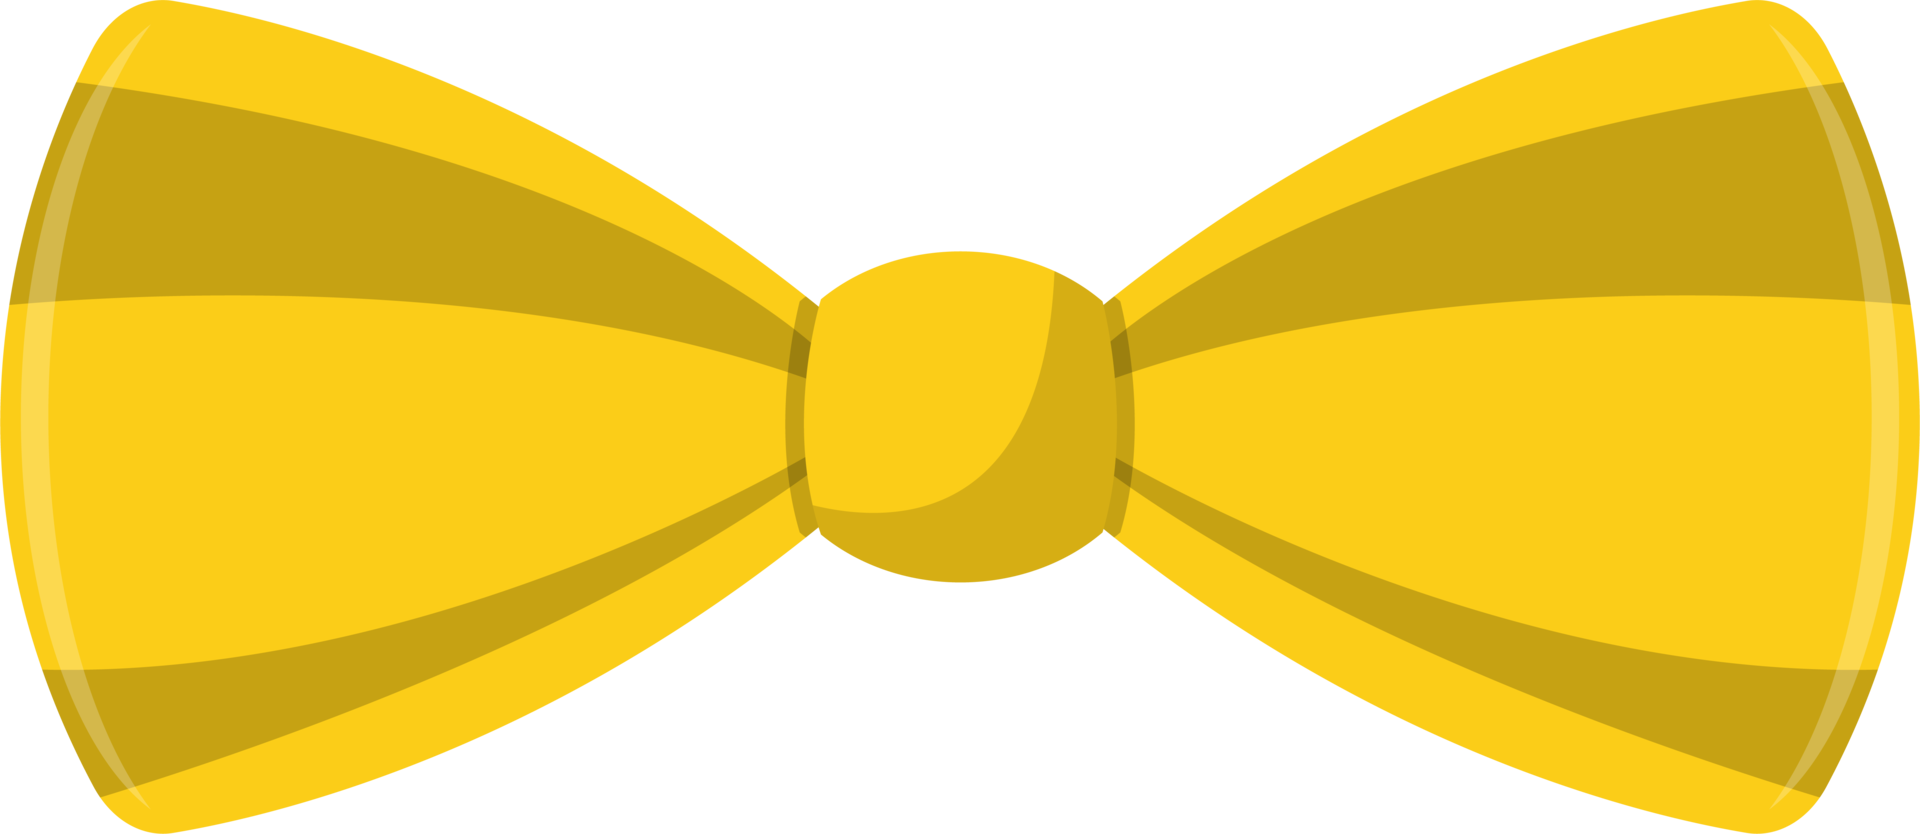 Bow tie png - Download Free Png Images